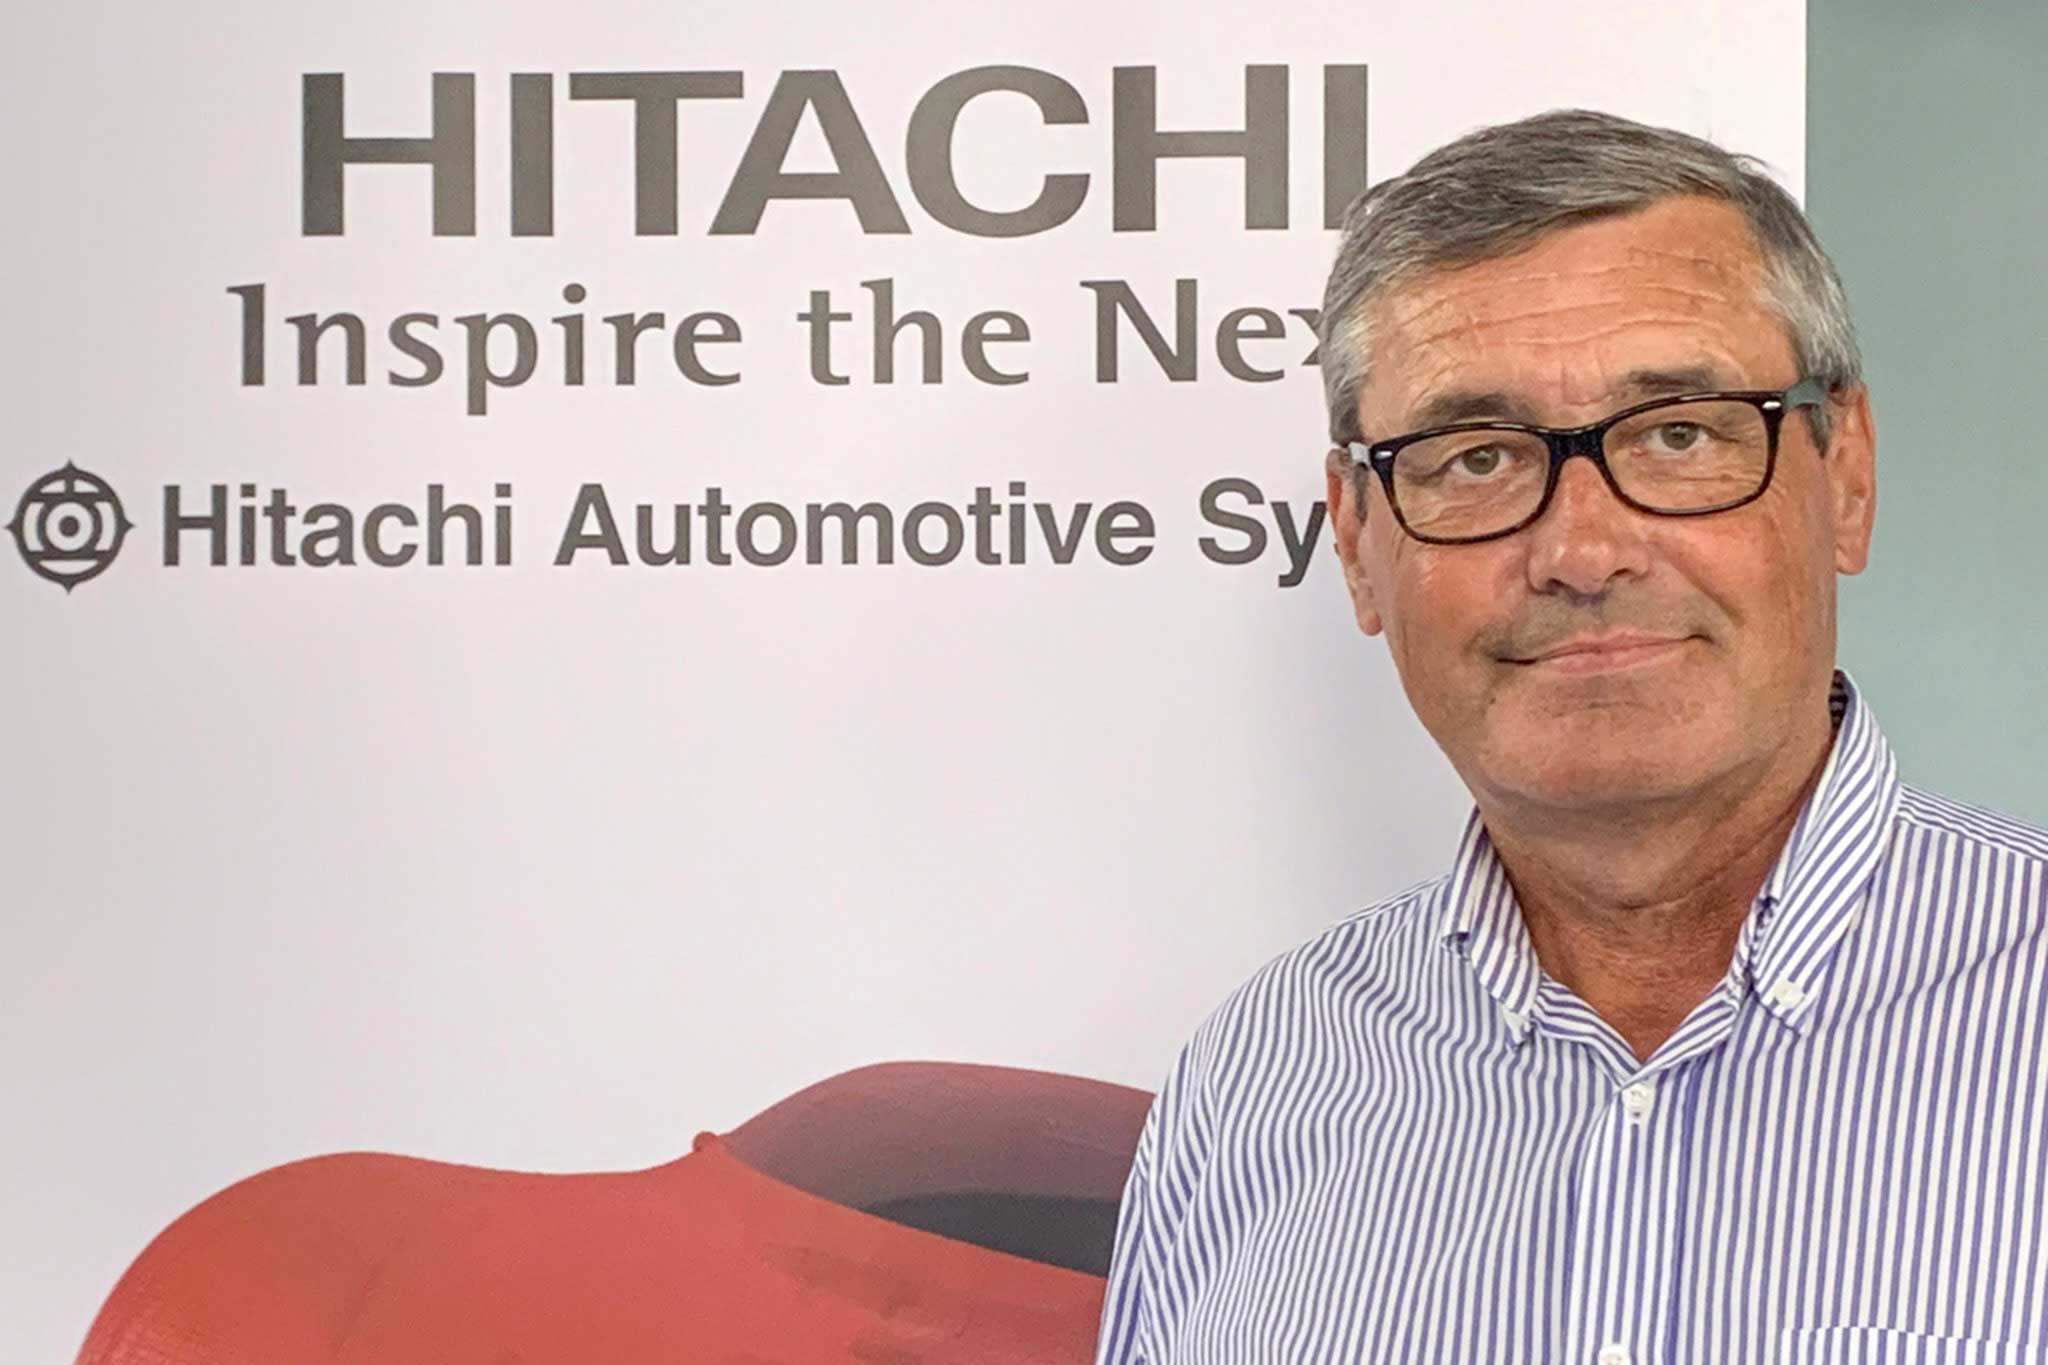 The image is of Hubert Klehenz, Global Purchasing Manager for Brake Systems at Hitachi Automotive Systems Group.